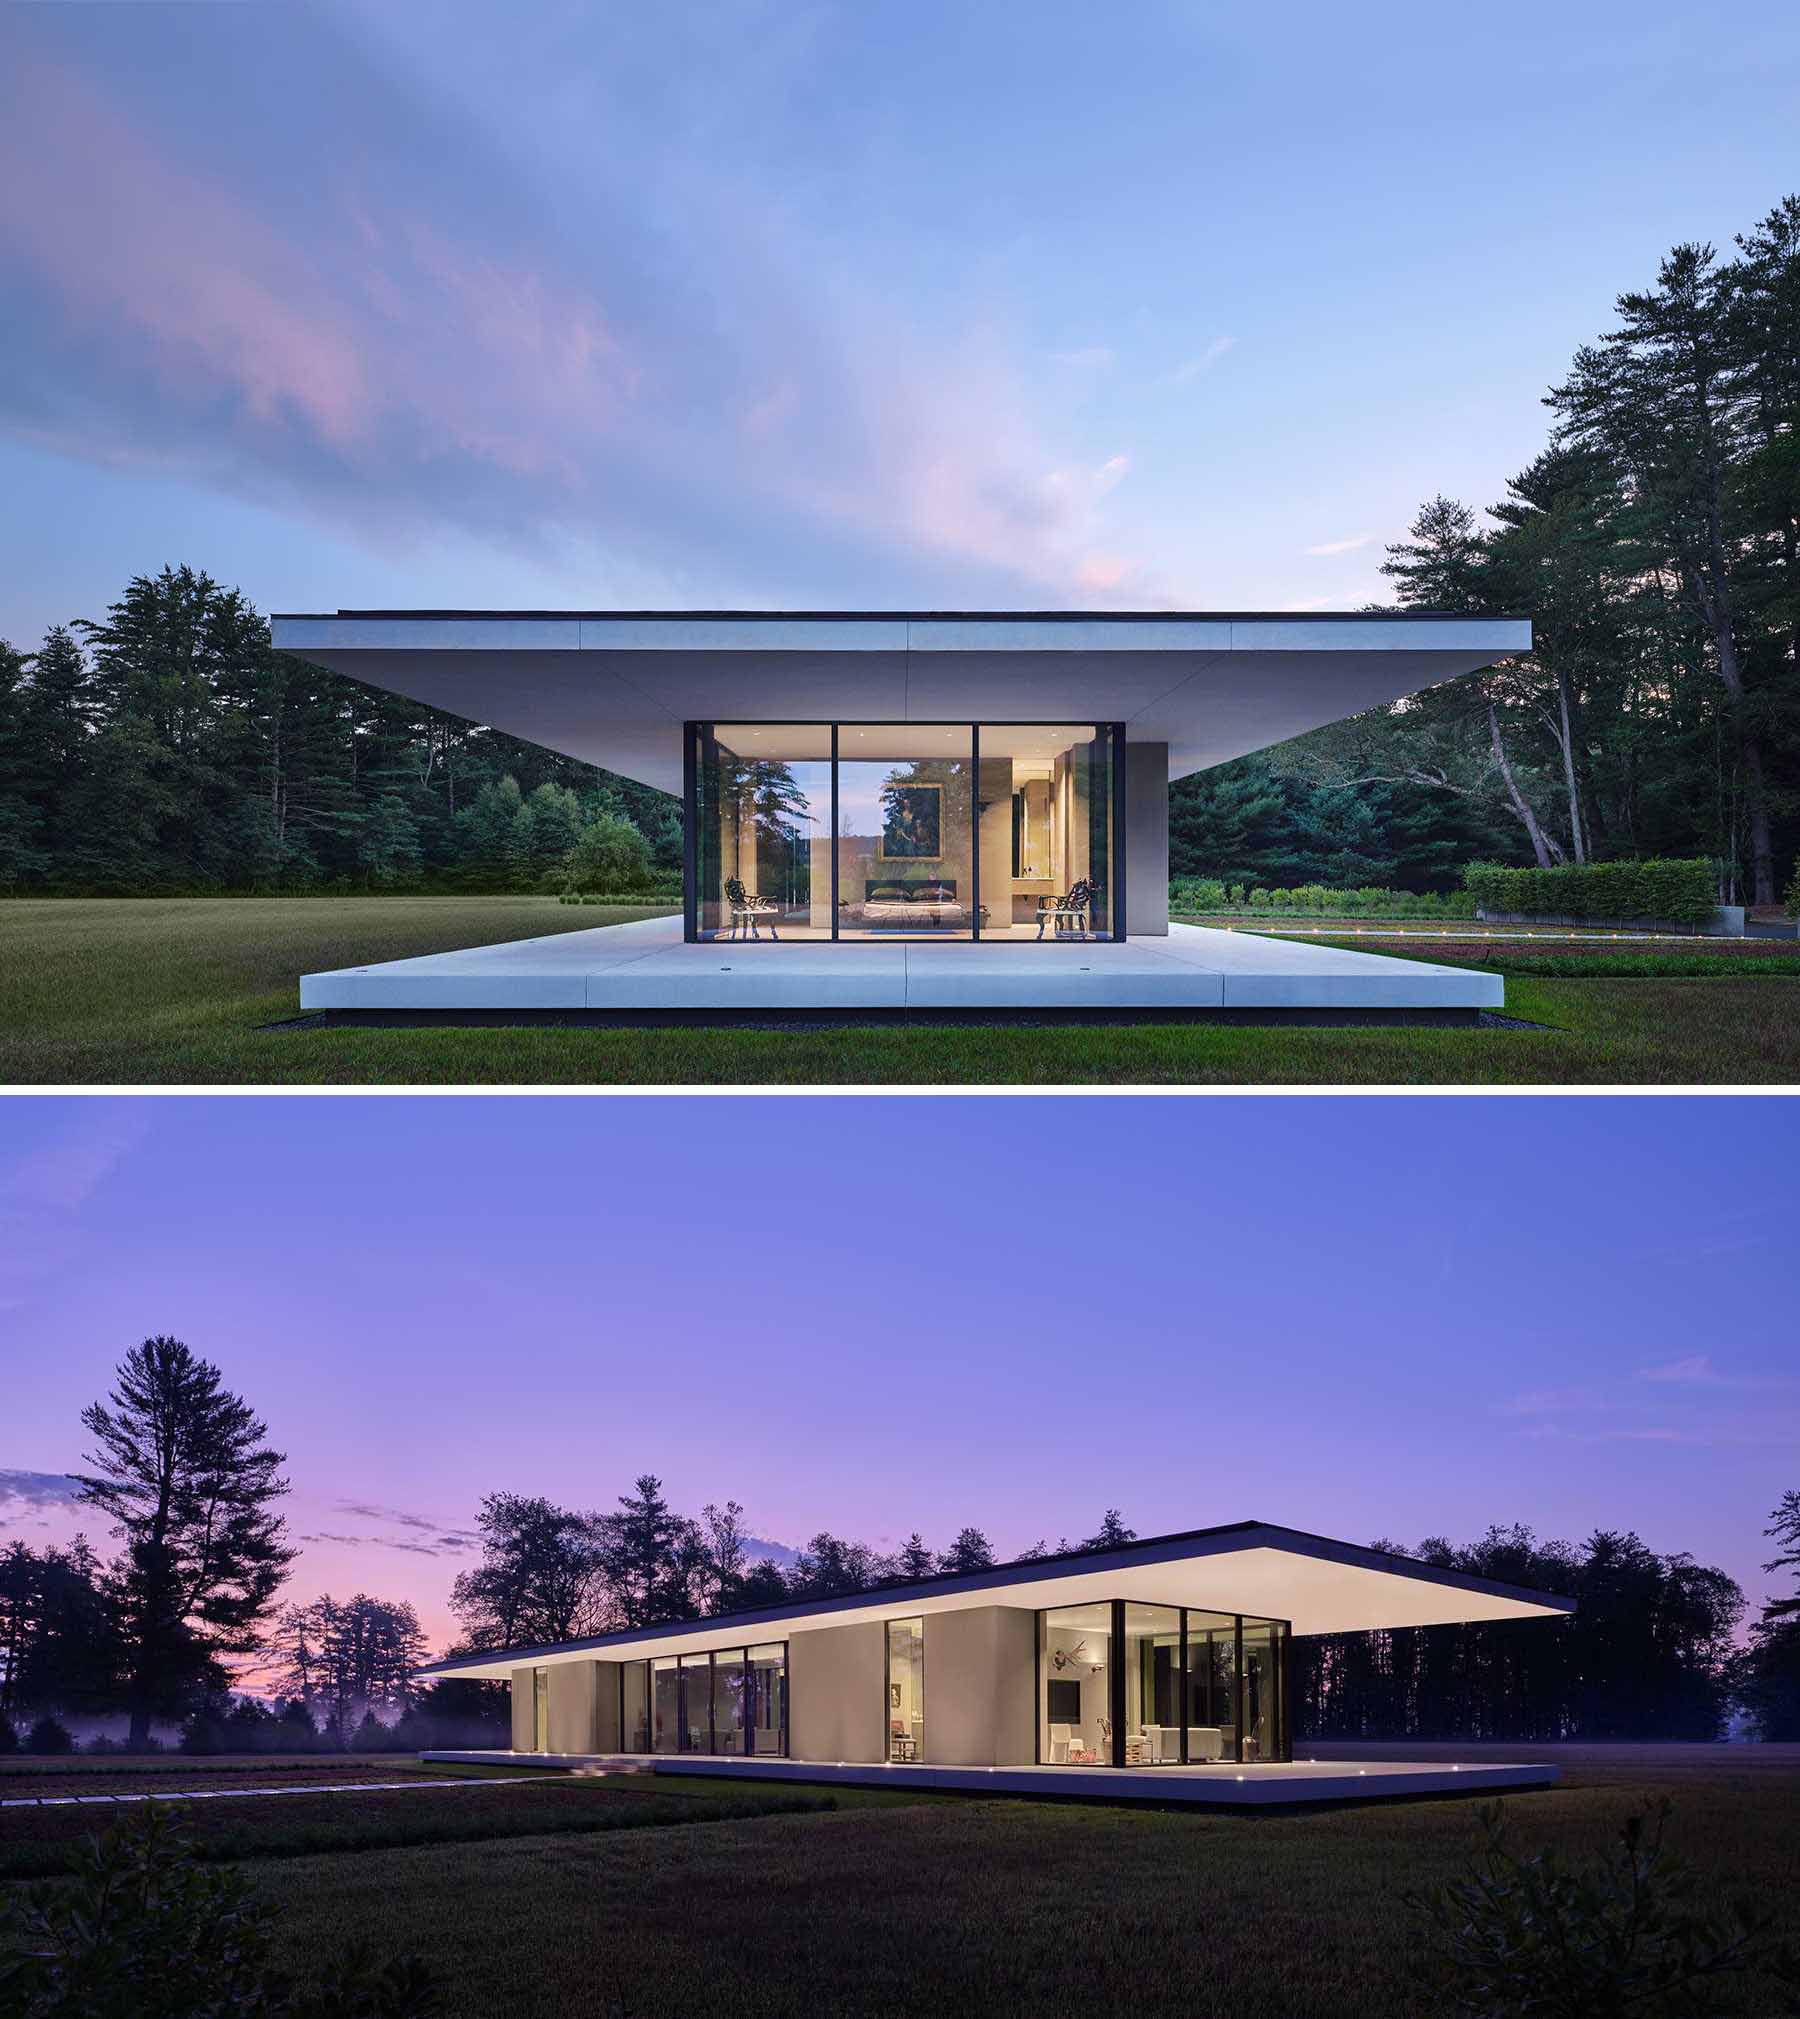 A modern single-storey home with a thin floating roof that cantilevers 15 feet.